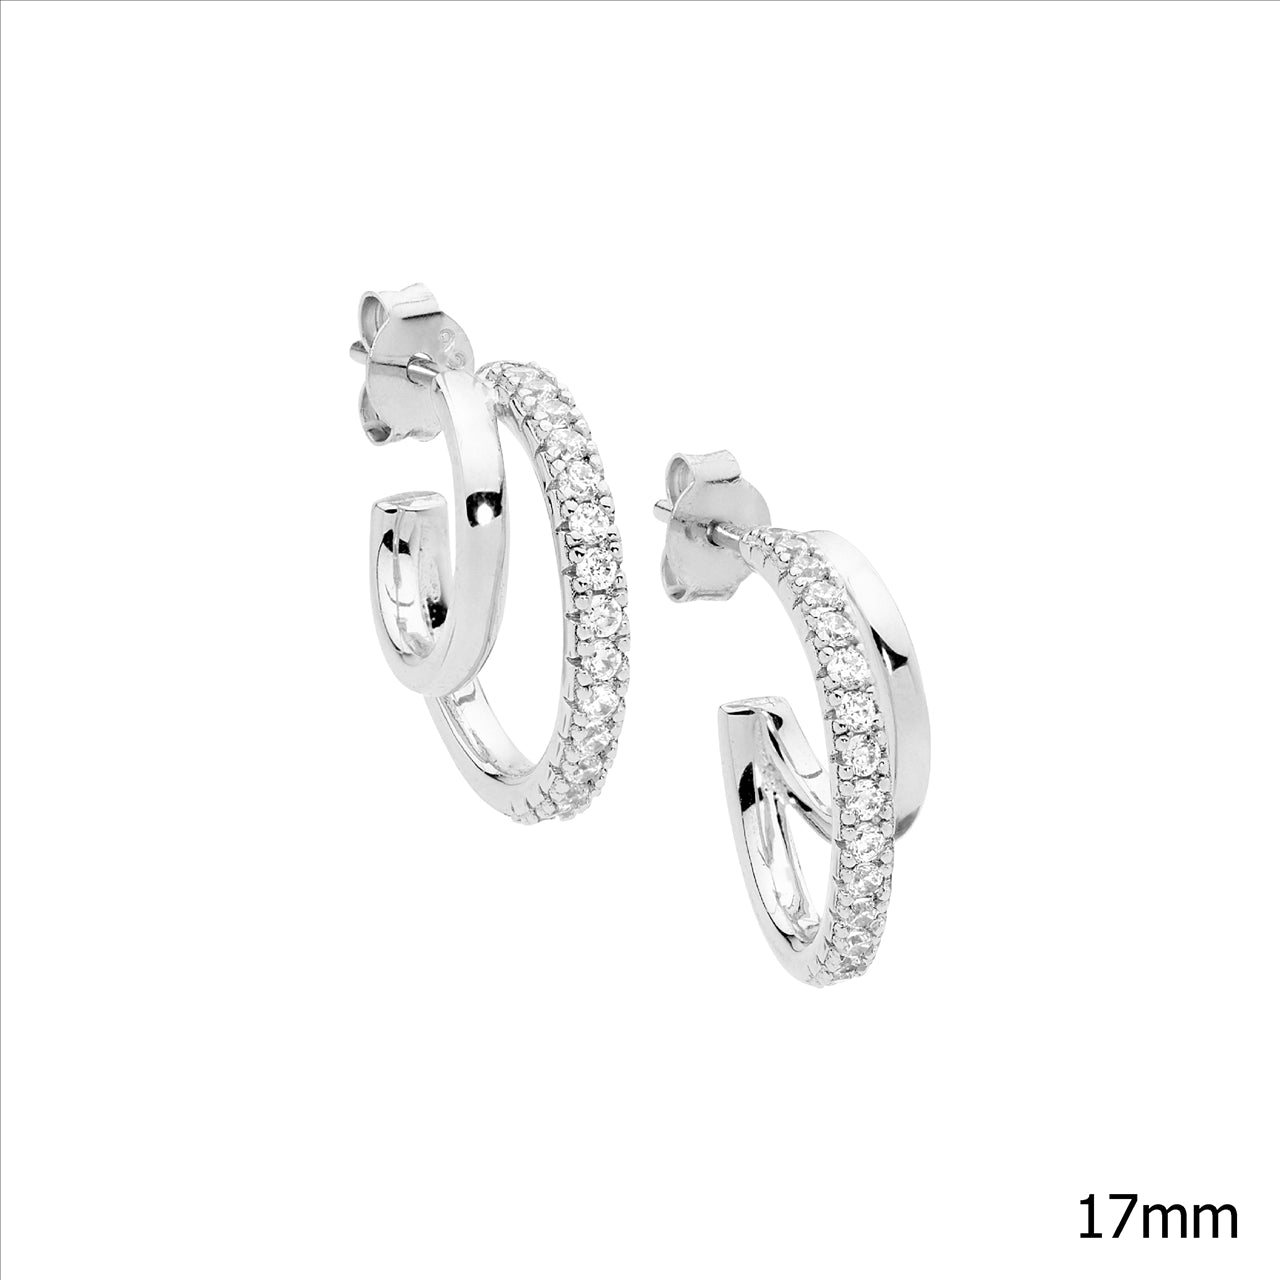 Sterling Silver 17mm Double Hoop Stud Earrings Set With White Cubic Zirconia's